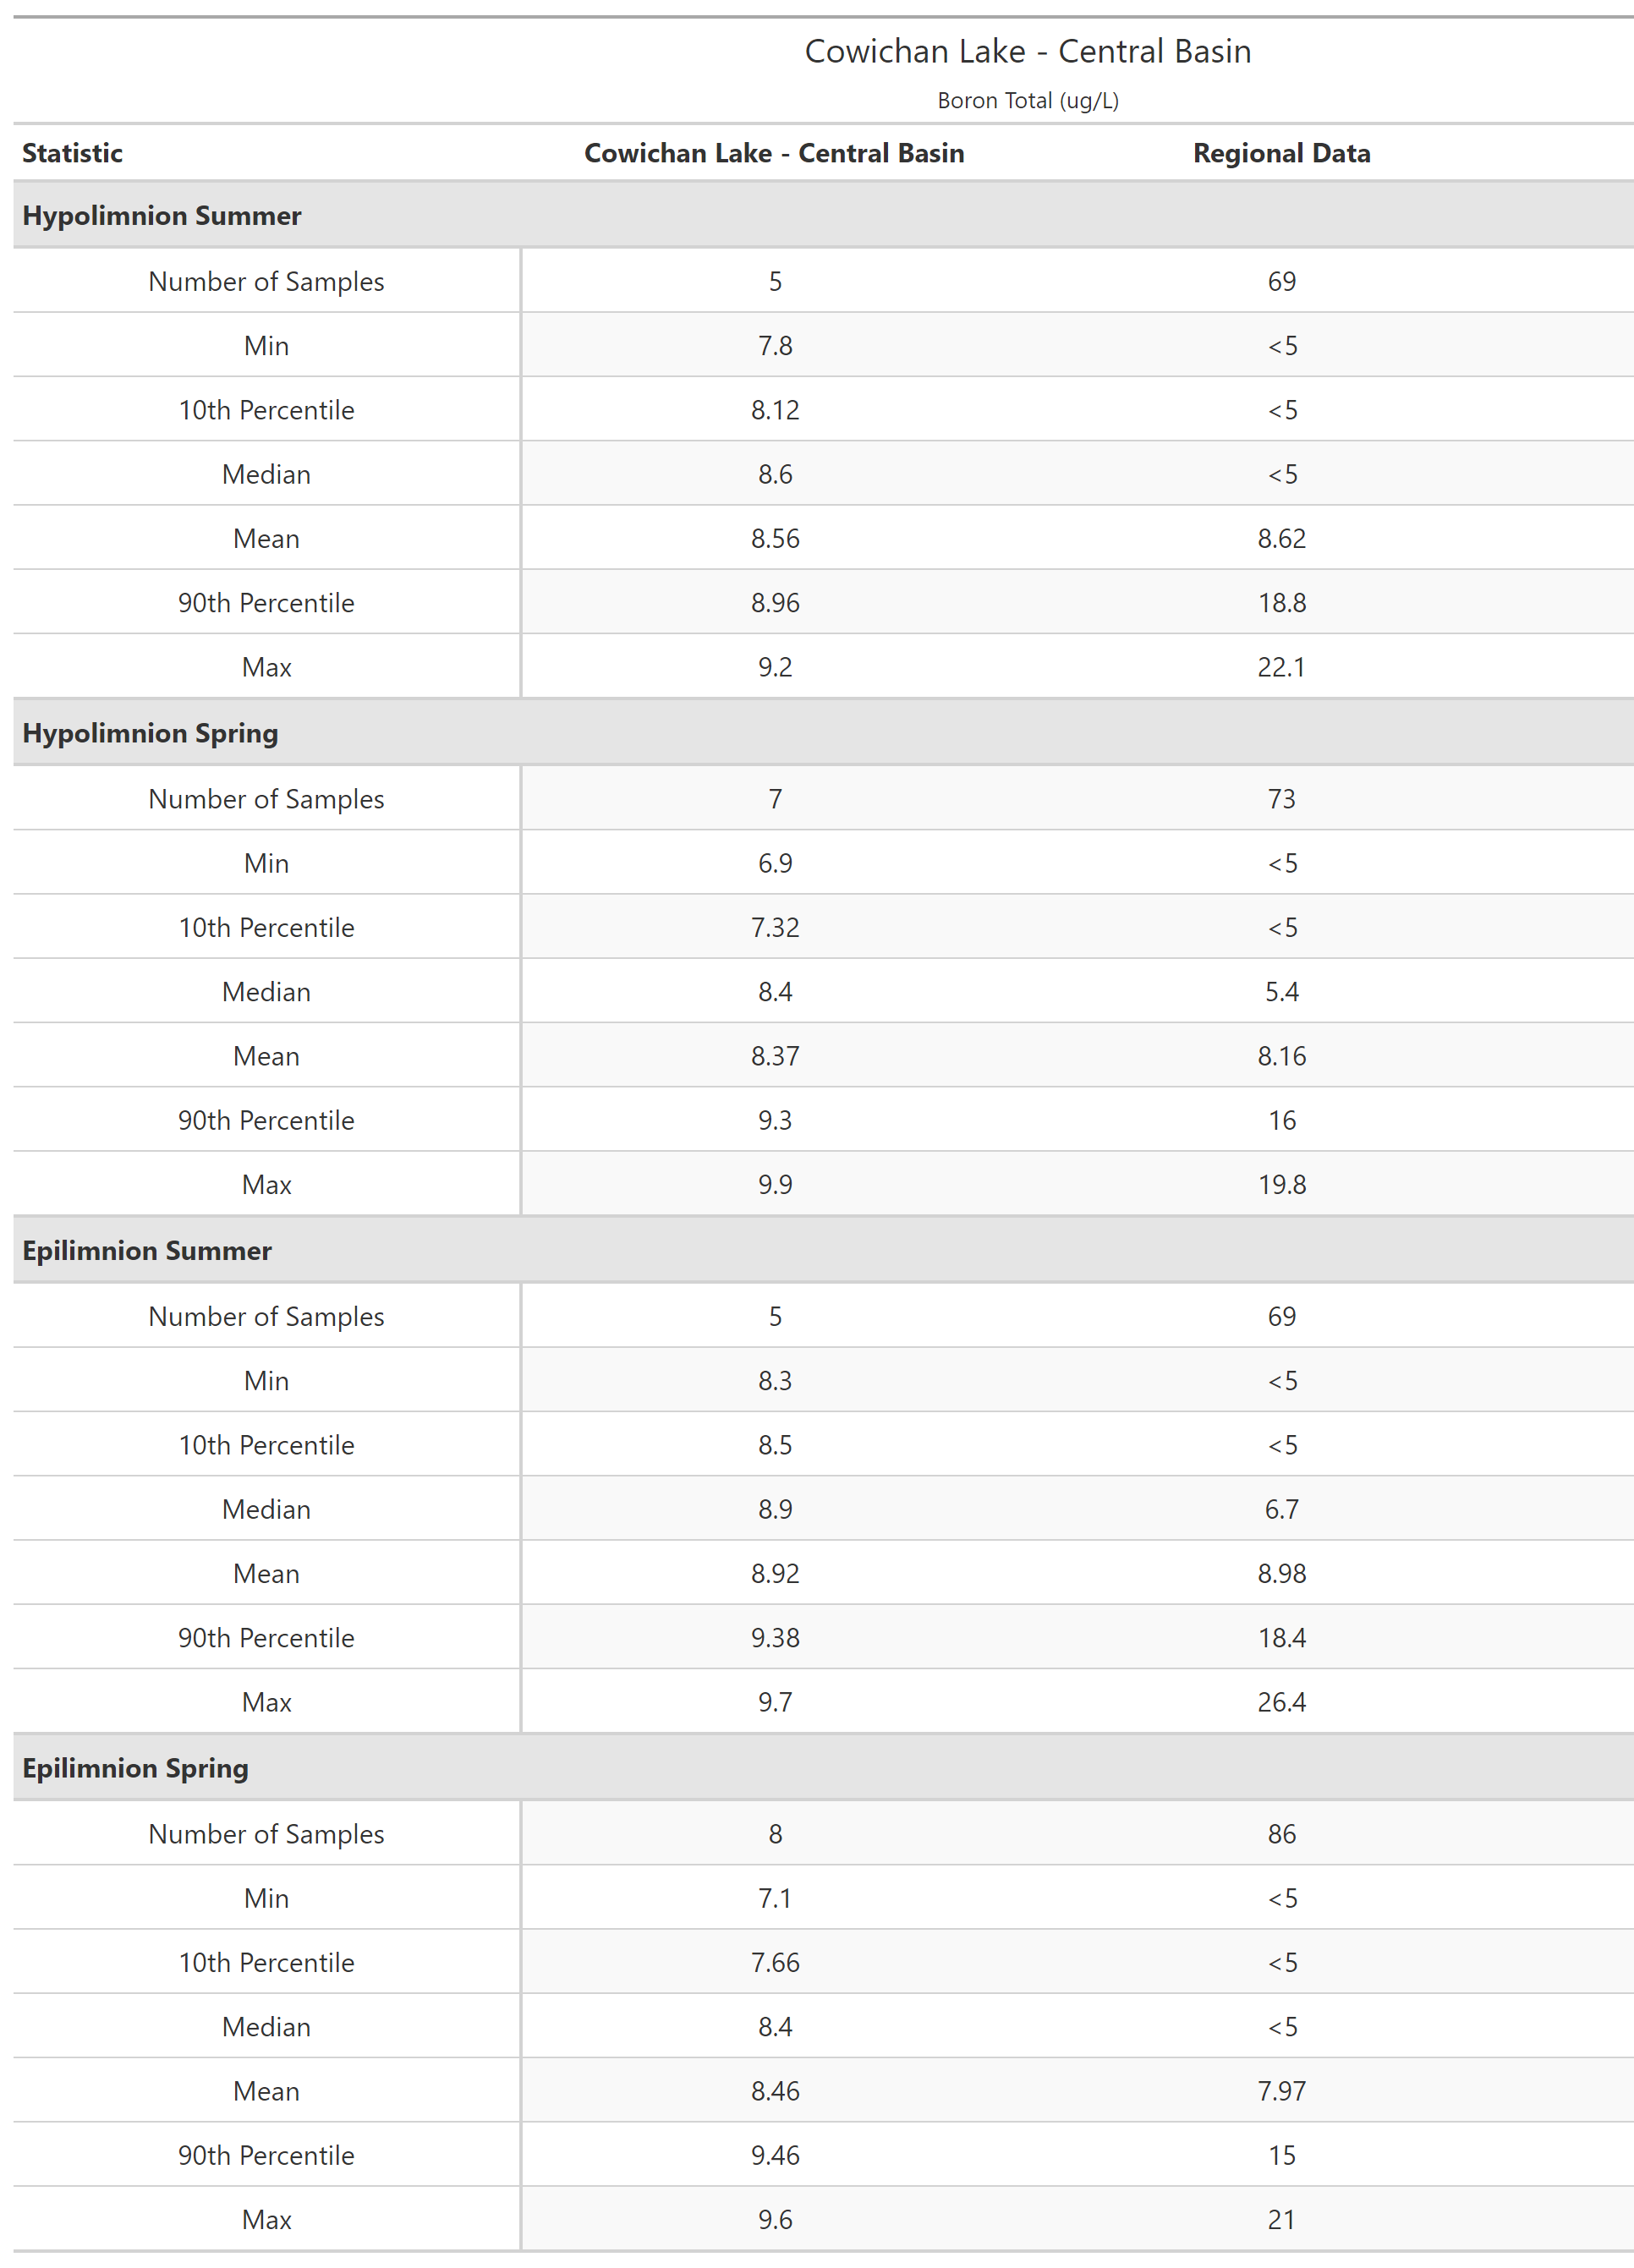 A table of summary statistics for Boron Total with comparison to regional data